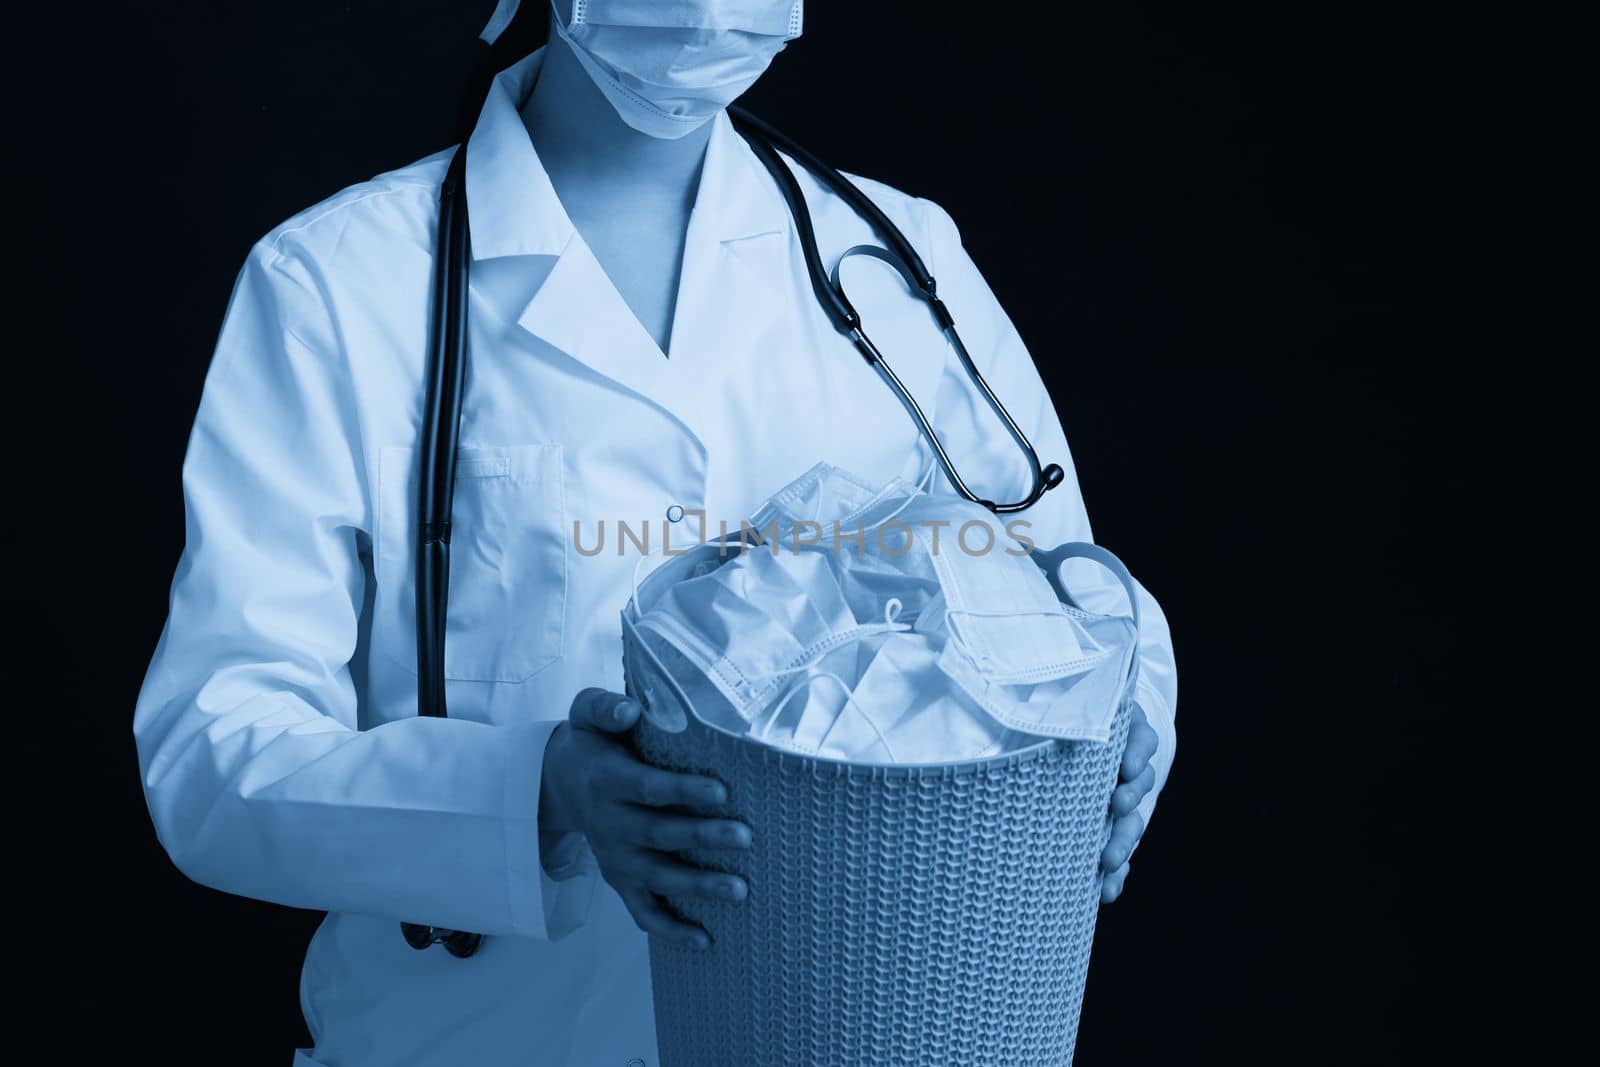 Doctor holding bucket full of used facial masks, throwing them away as symbol of epidemic ending by Mariakray